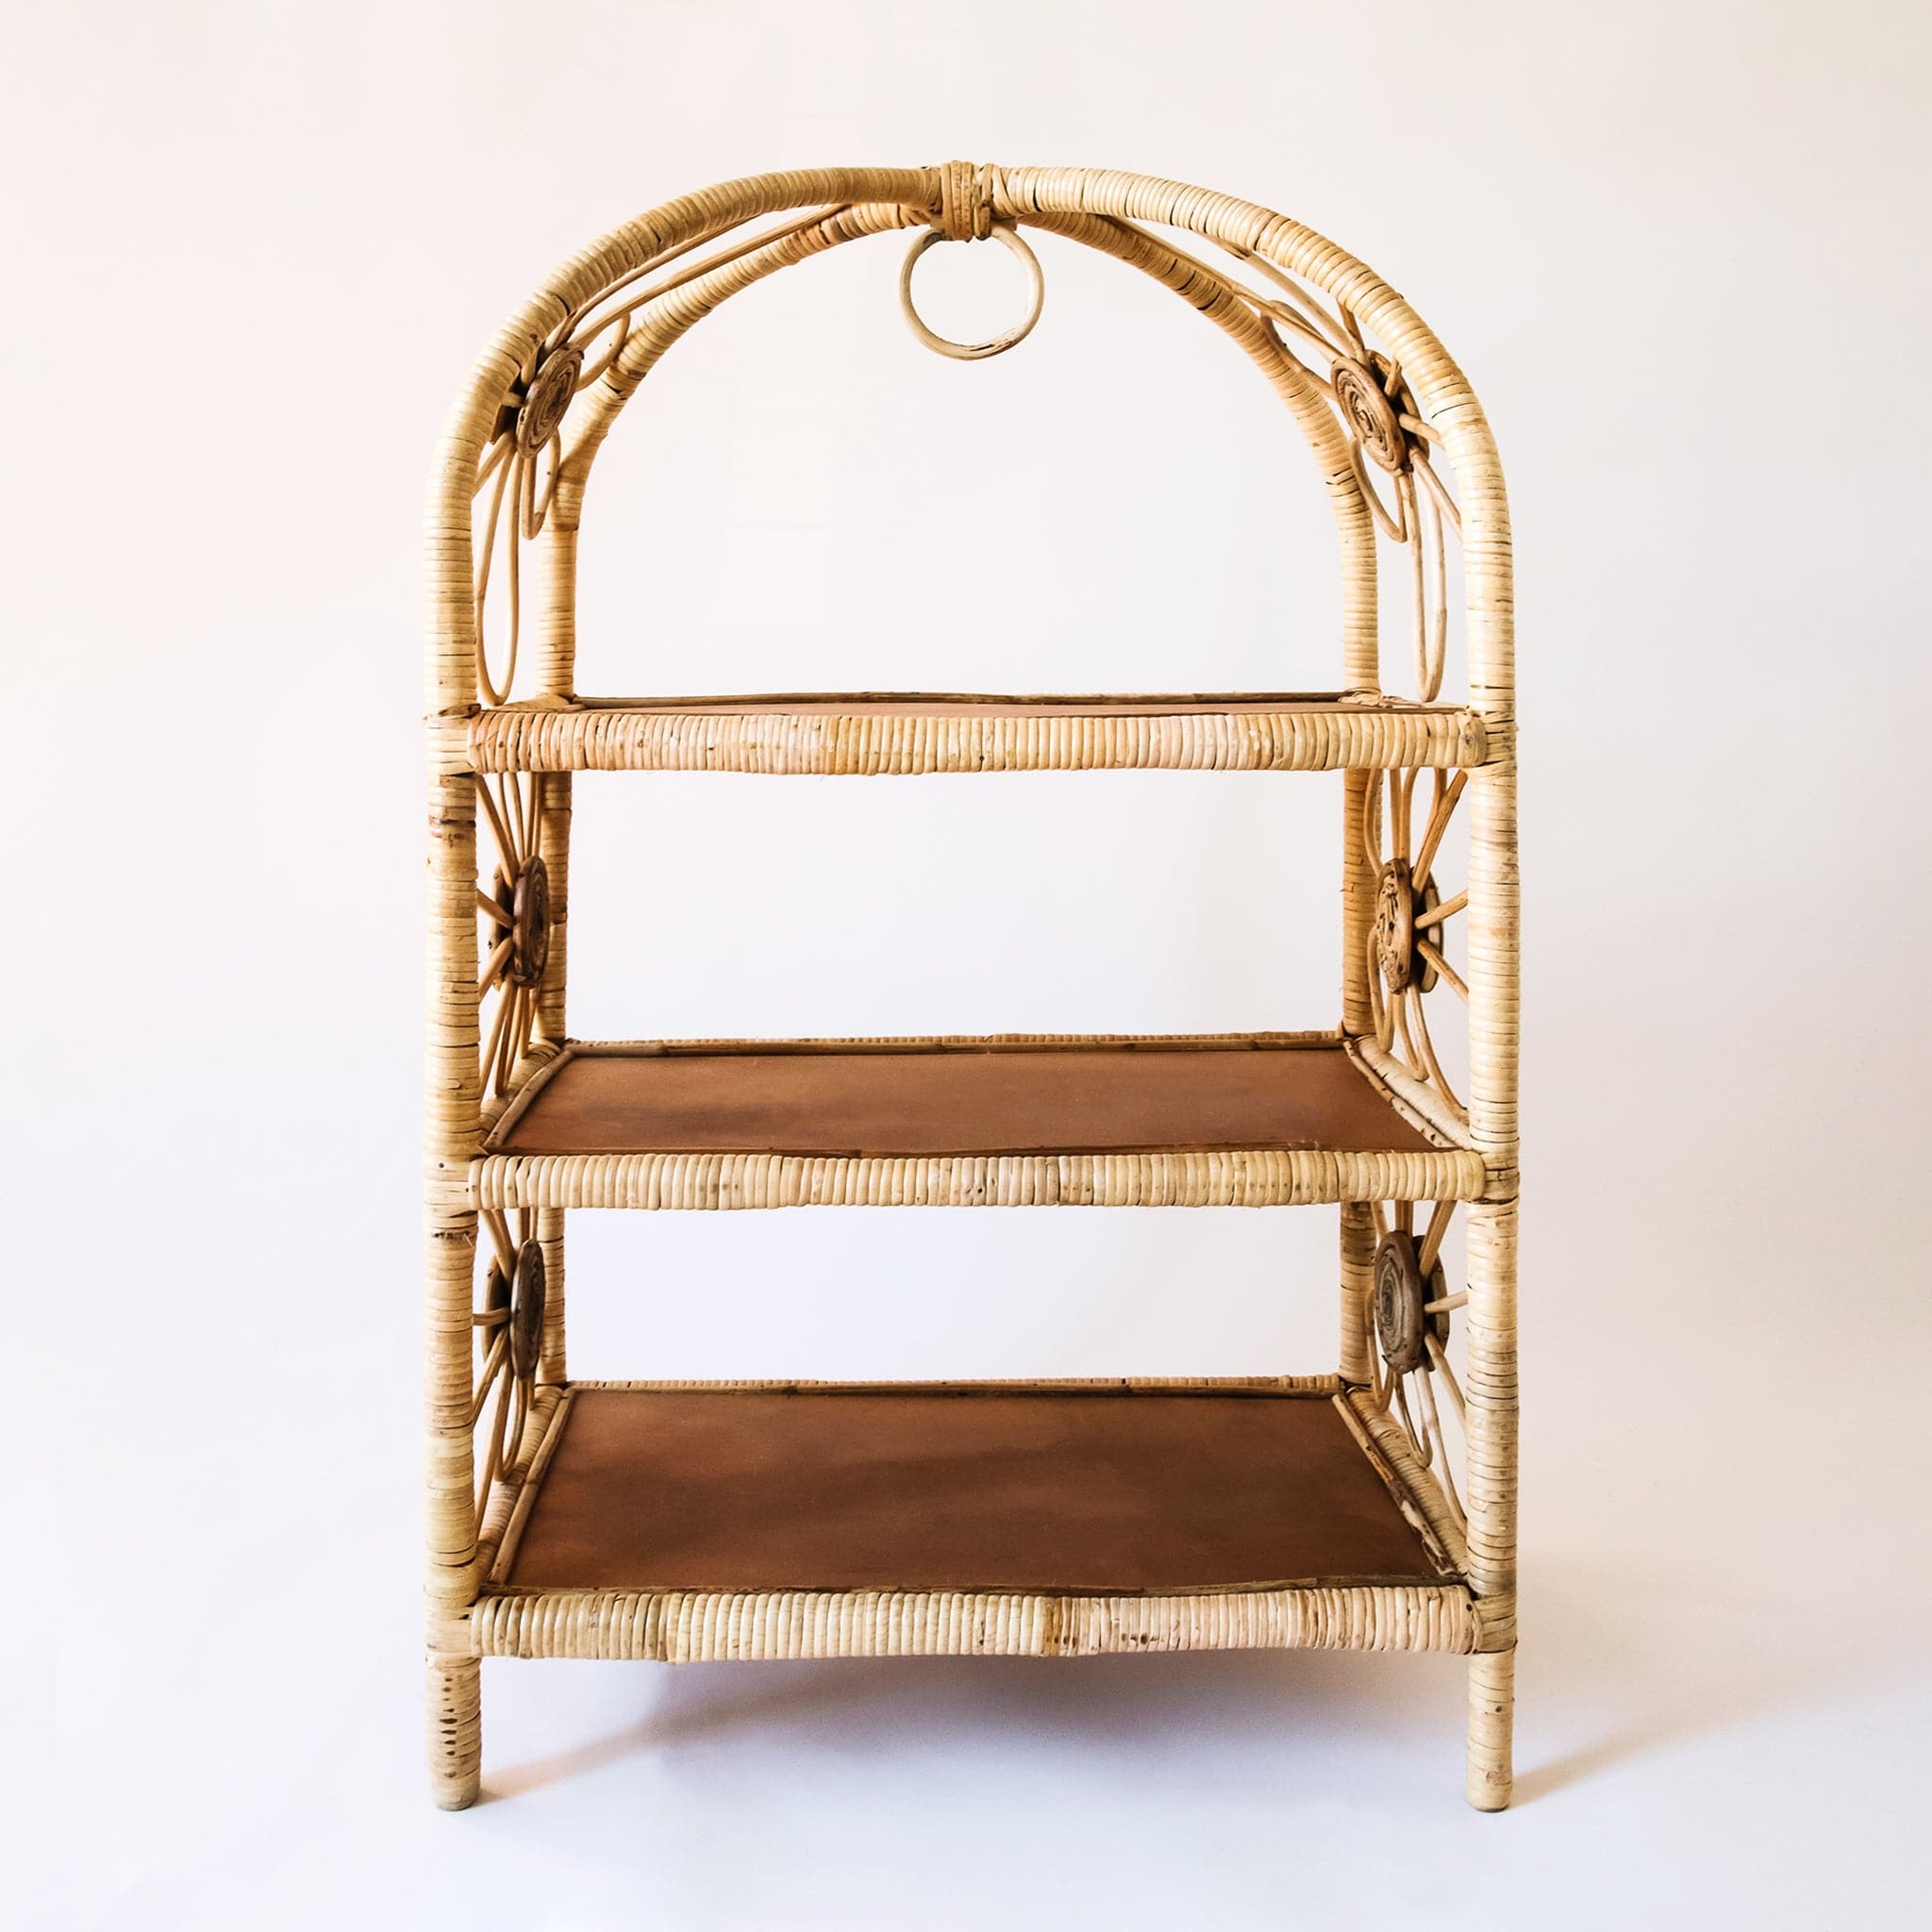 Natural woven rattan shelf with daisy accents on both sides. The sides are open and let in ample light to keep the shelves well lit. Each shelf is covered in rattan and has a chocolate brown bottom.